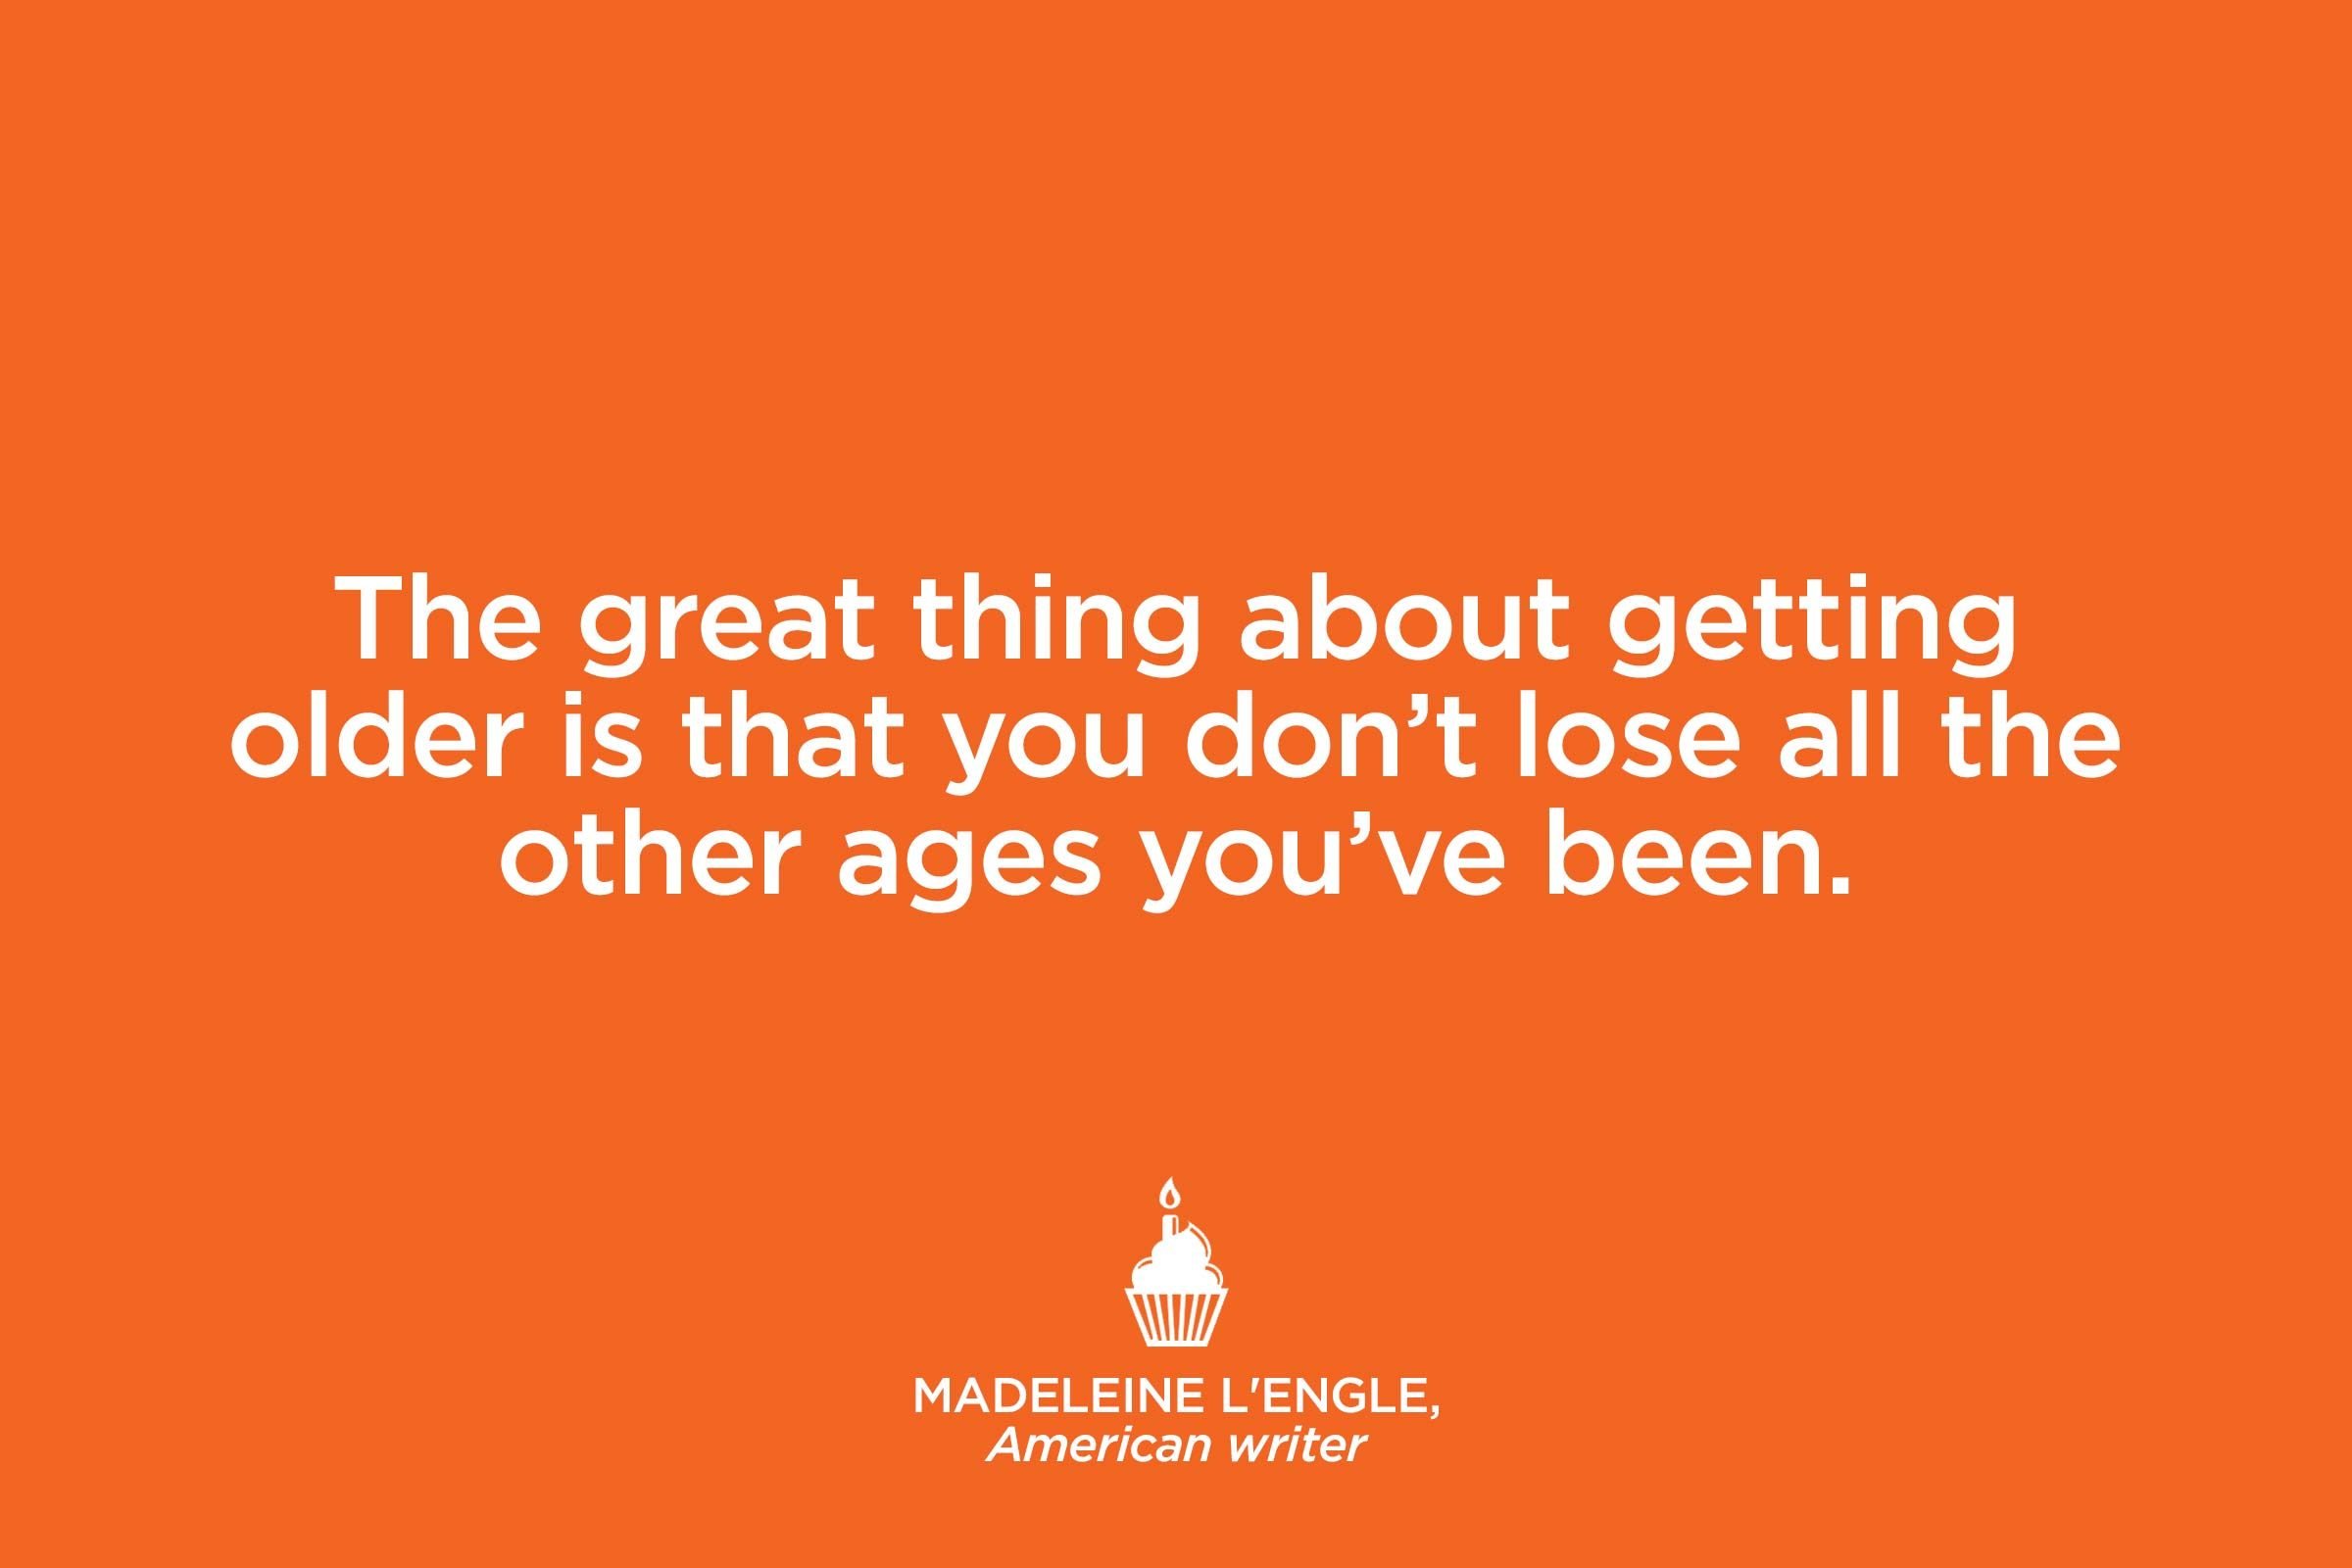 Quotes That Make You Feel Better About Getting Older The Healthy